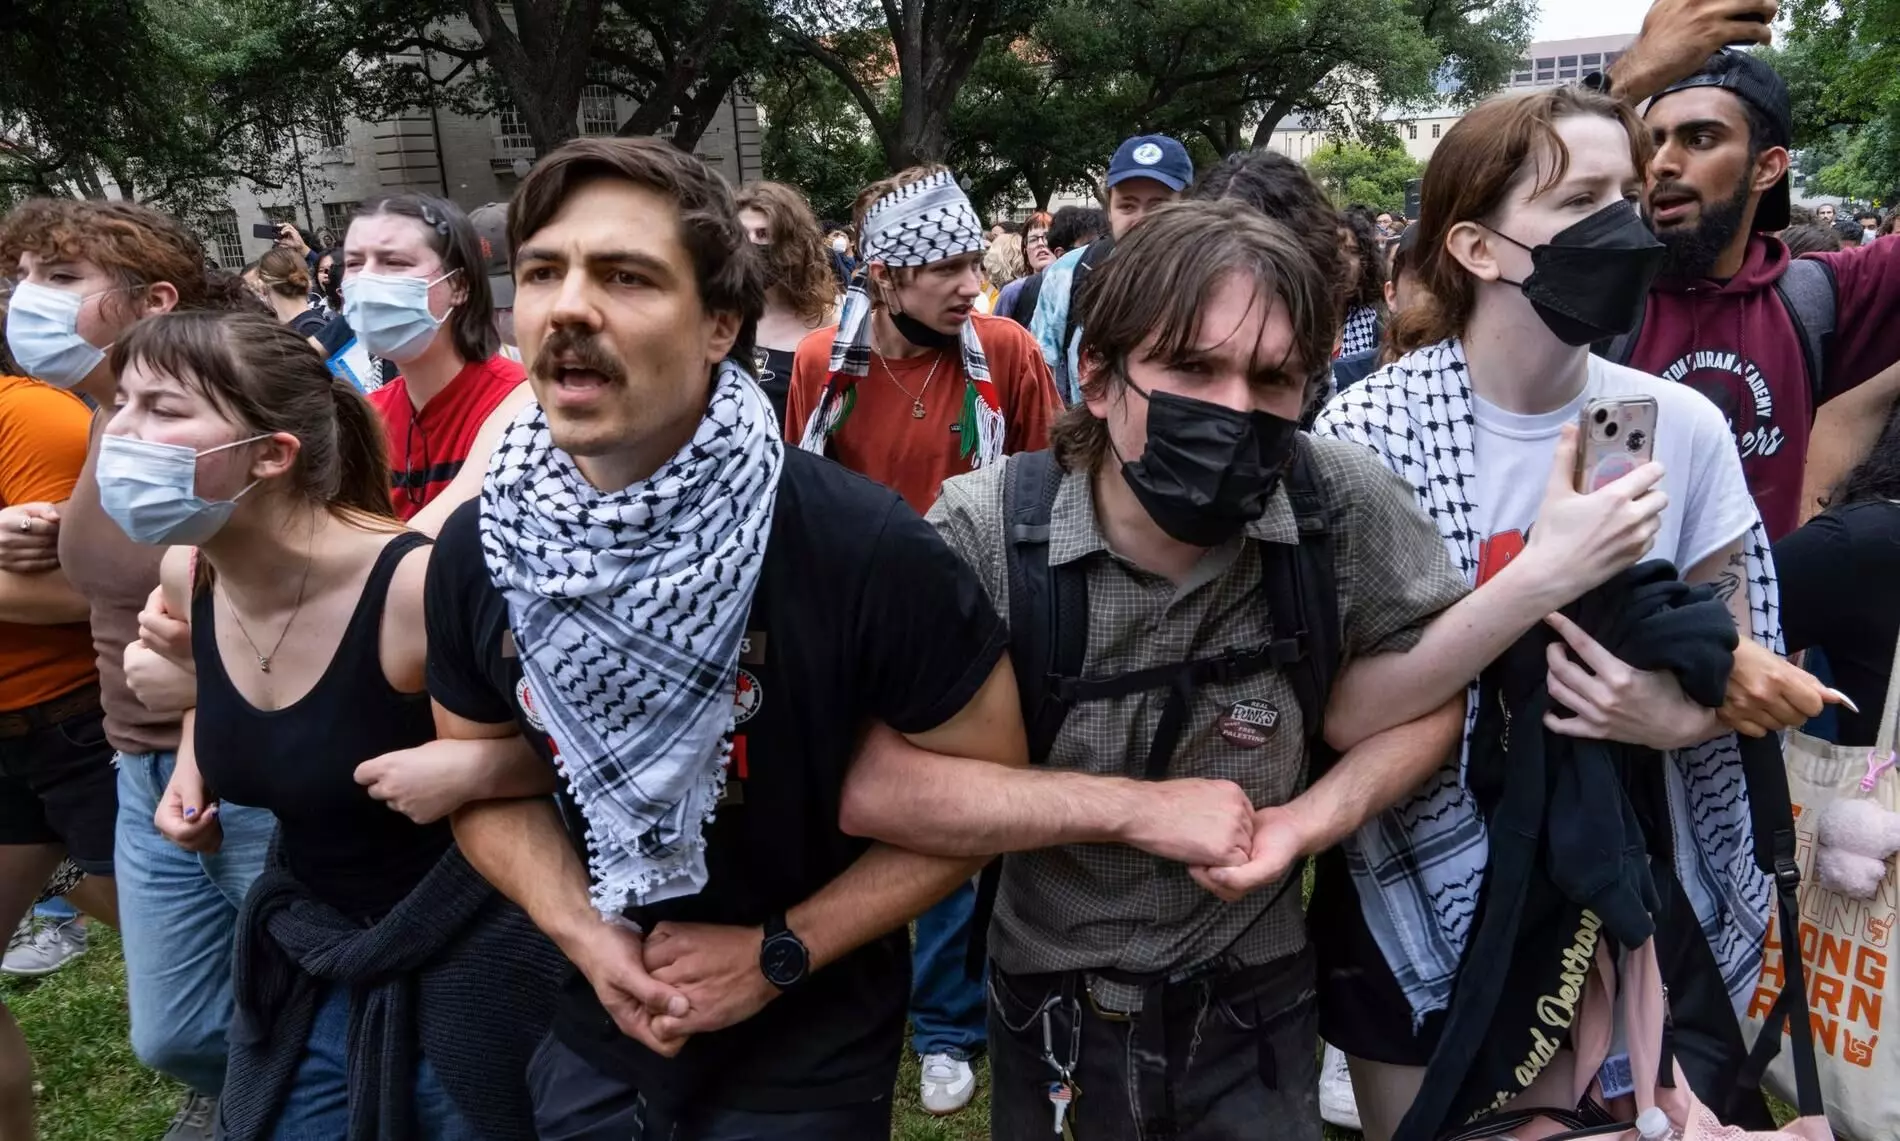 Pro-Palestine protests rock US College campuses, prompting arrests, controversy